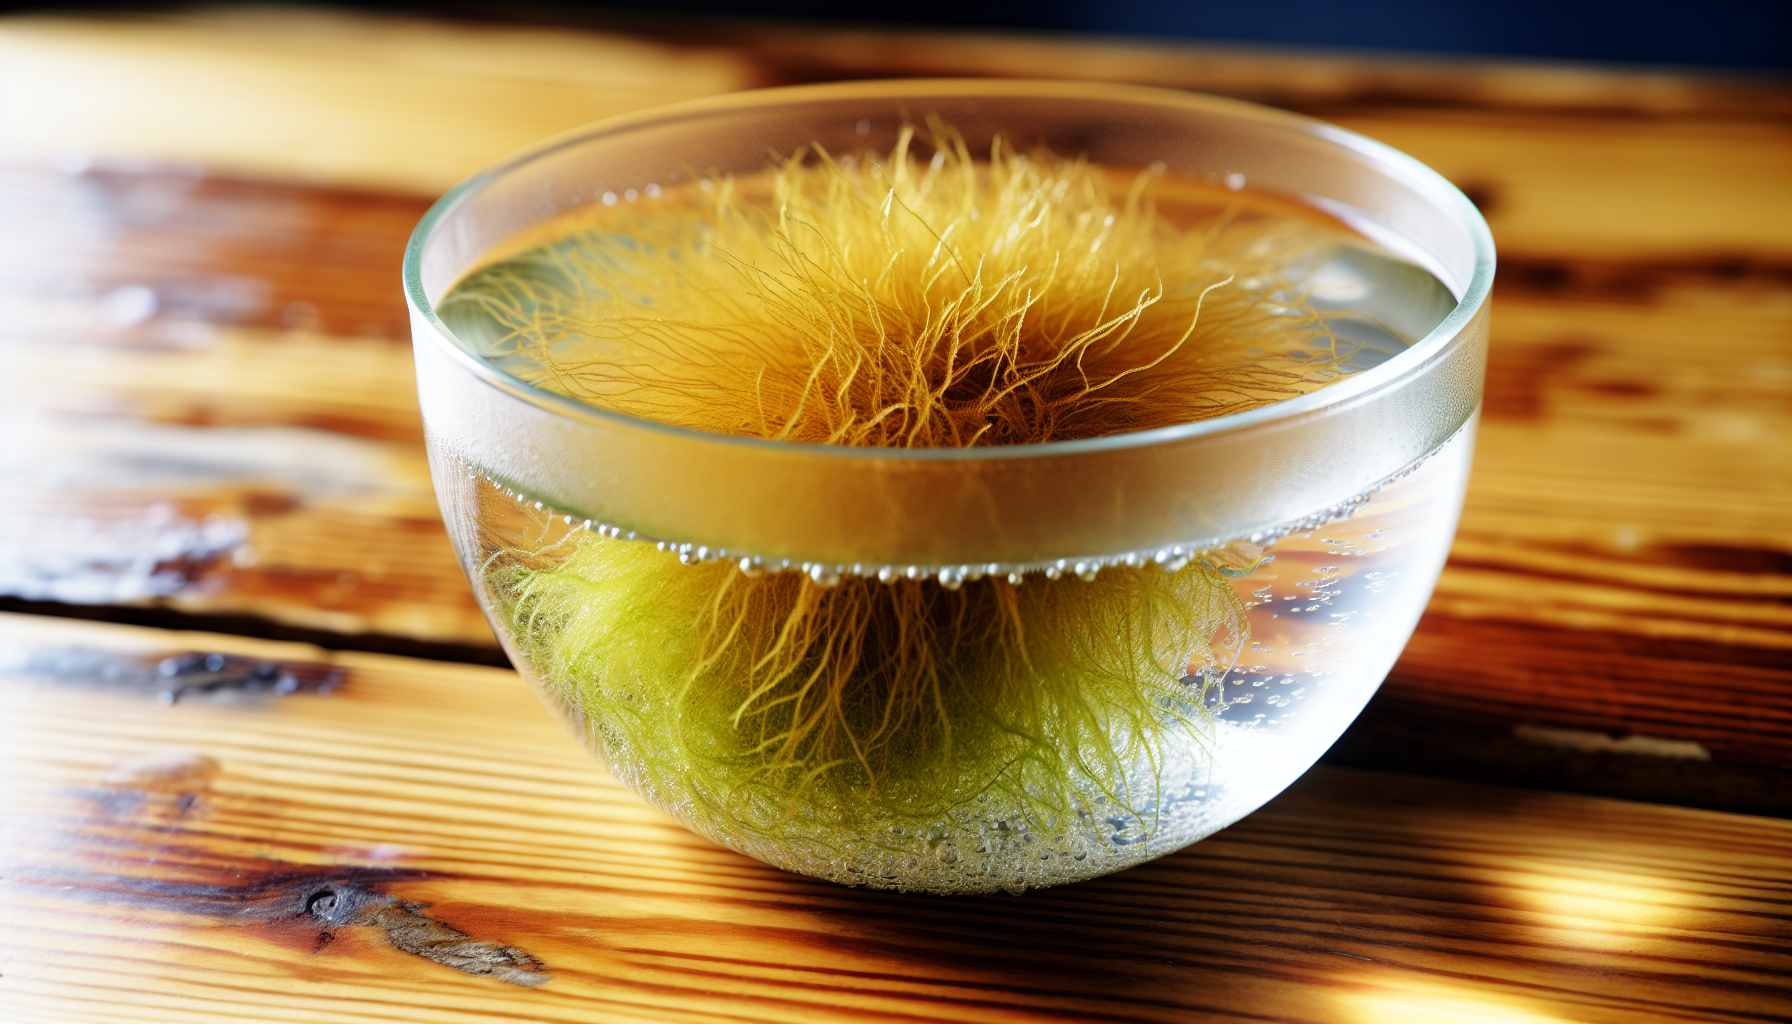 Soaked sea moss in a bowl of water